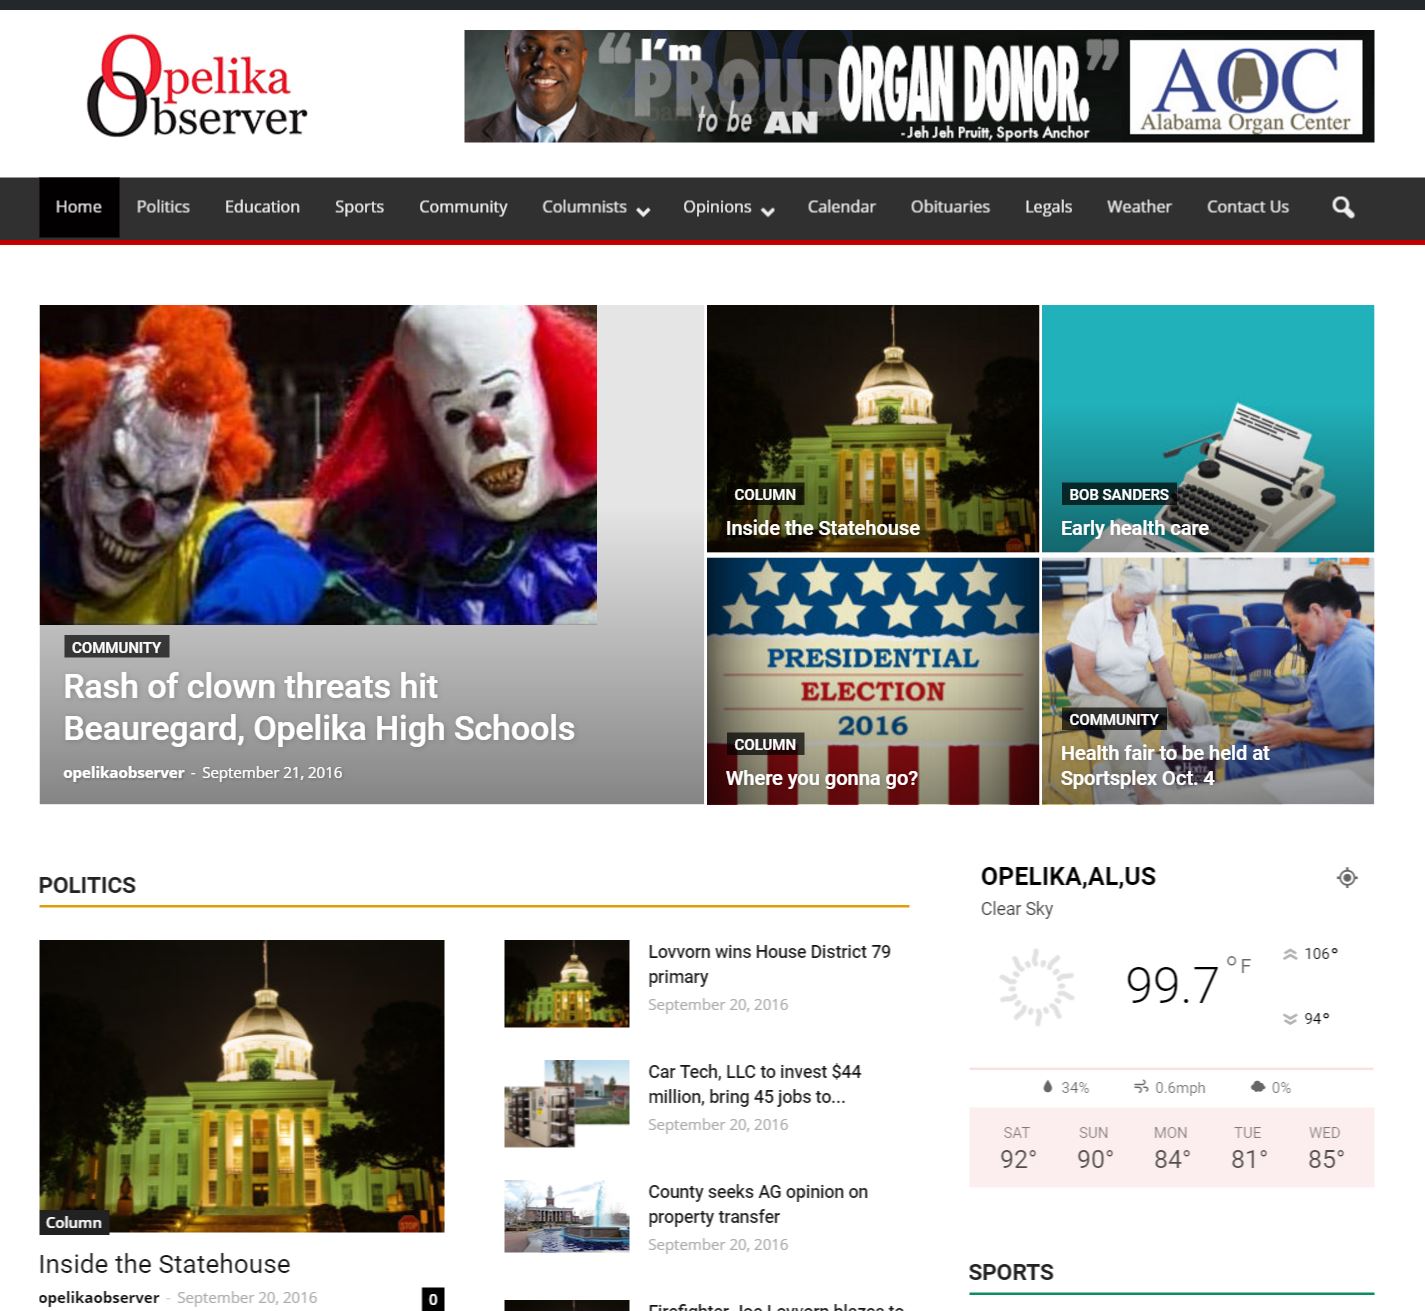 Welcome to the new Opelika Observer website